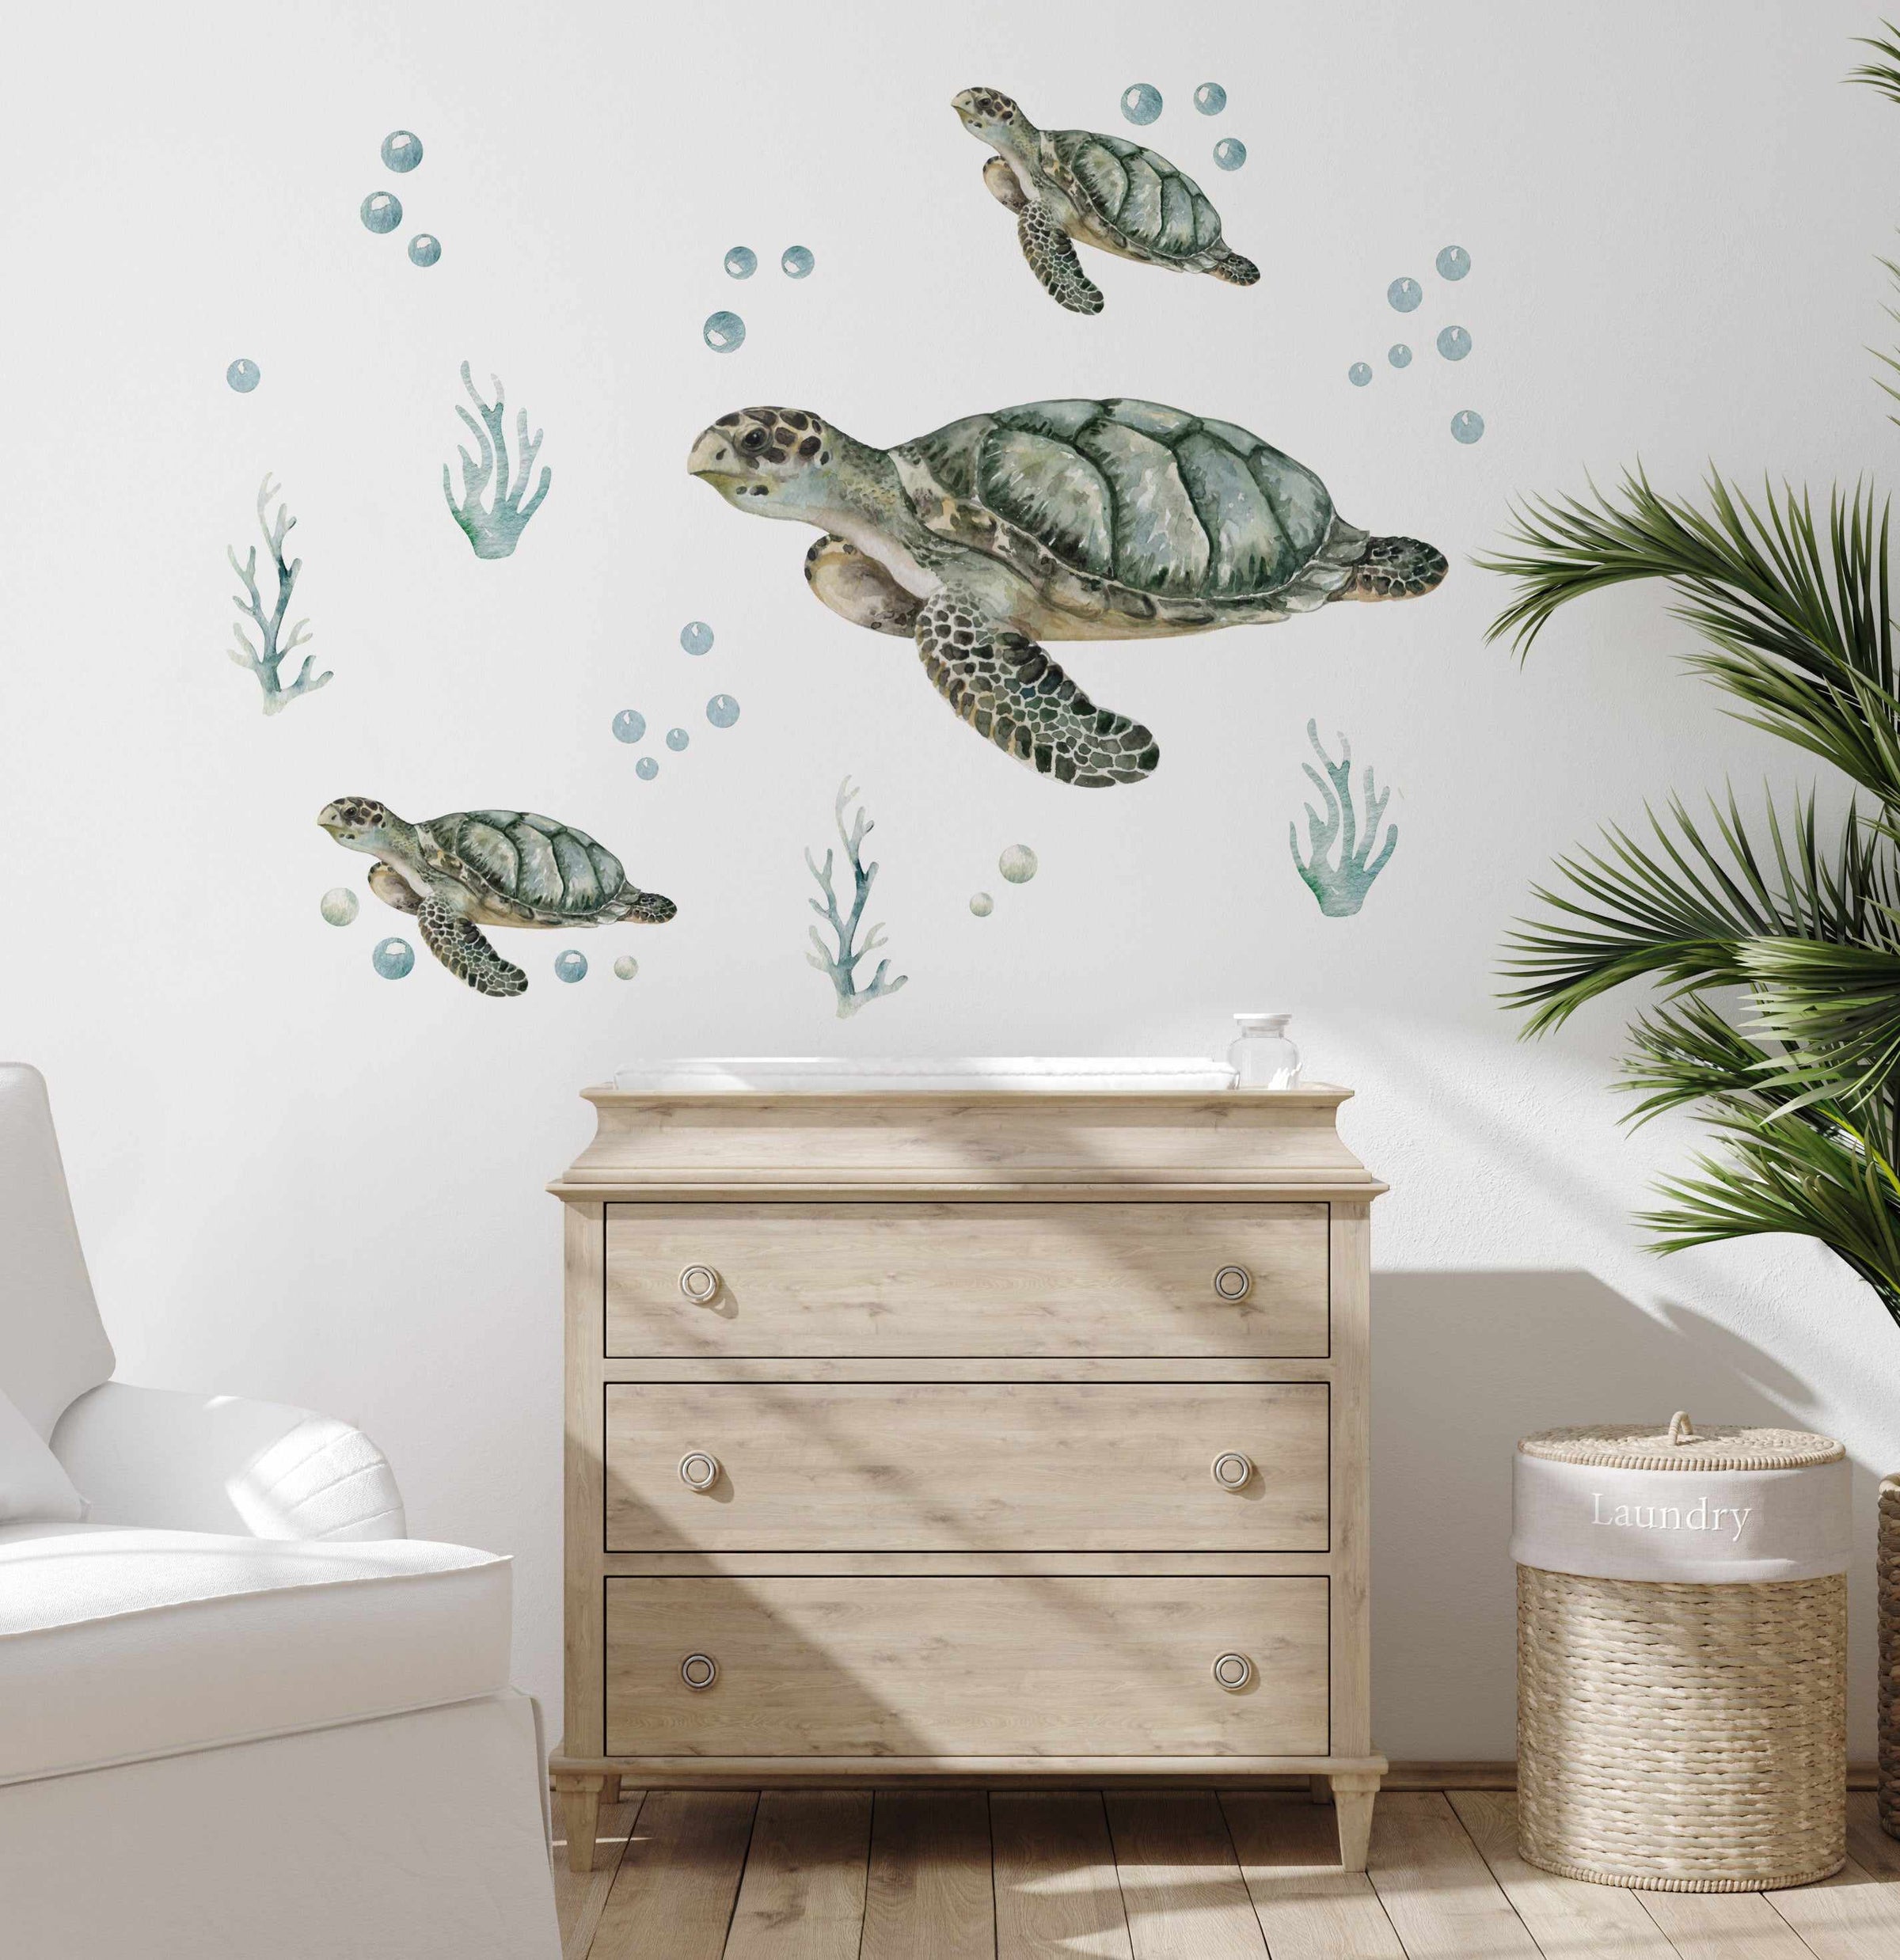 SHOP Turtles and Bubbles Peel & Stick Fabric Removable Wall Decals